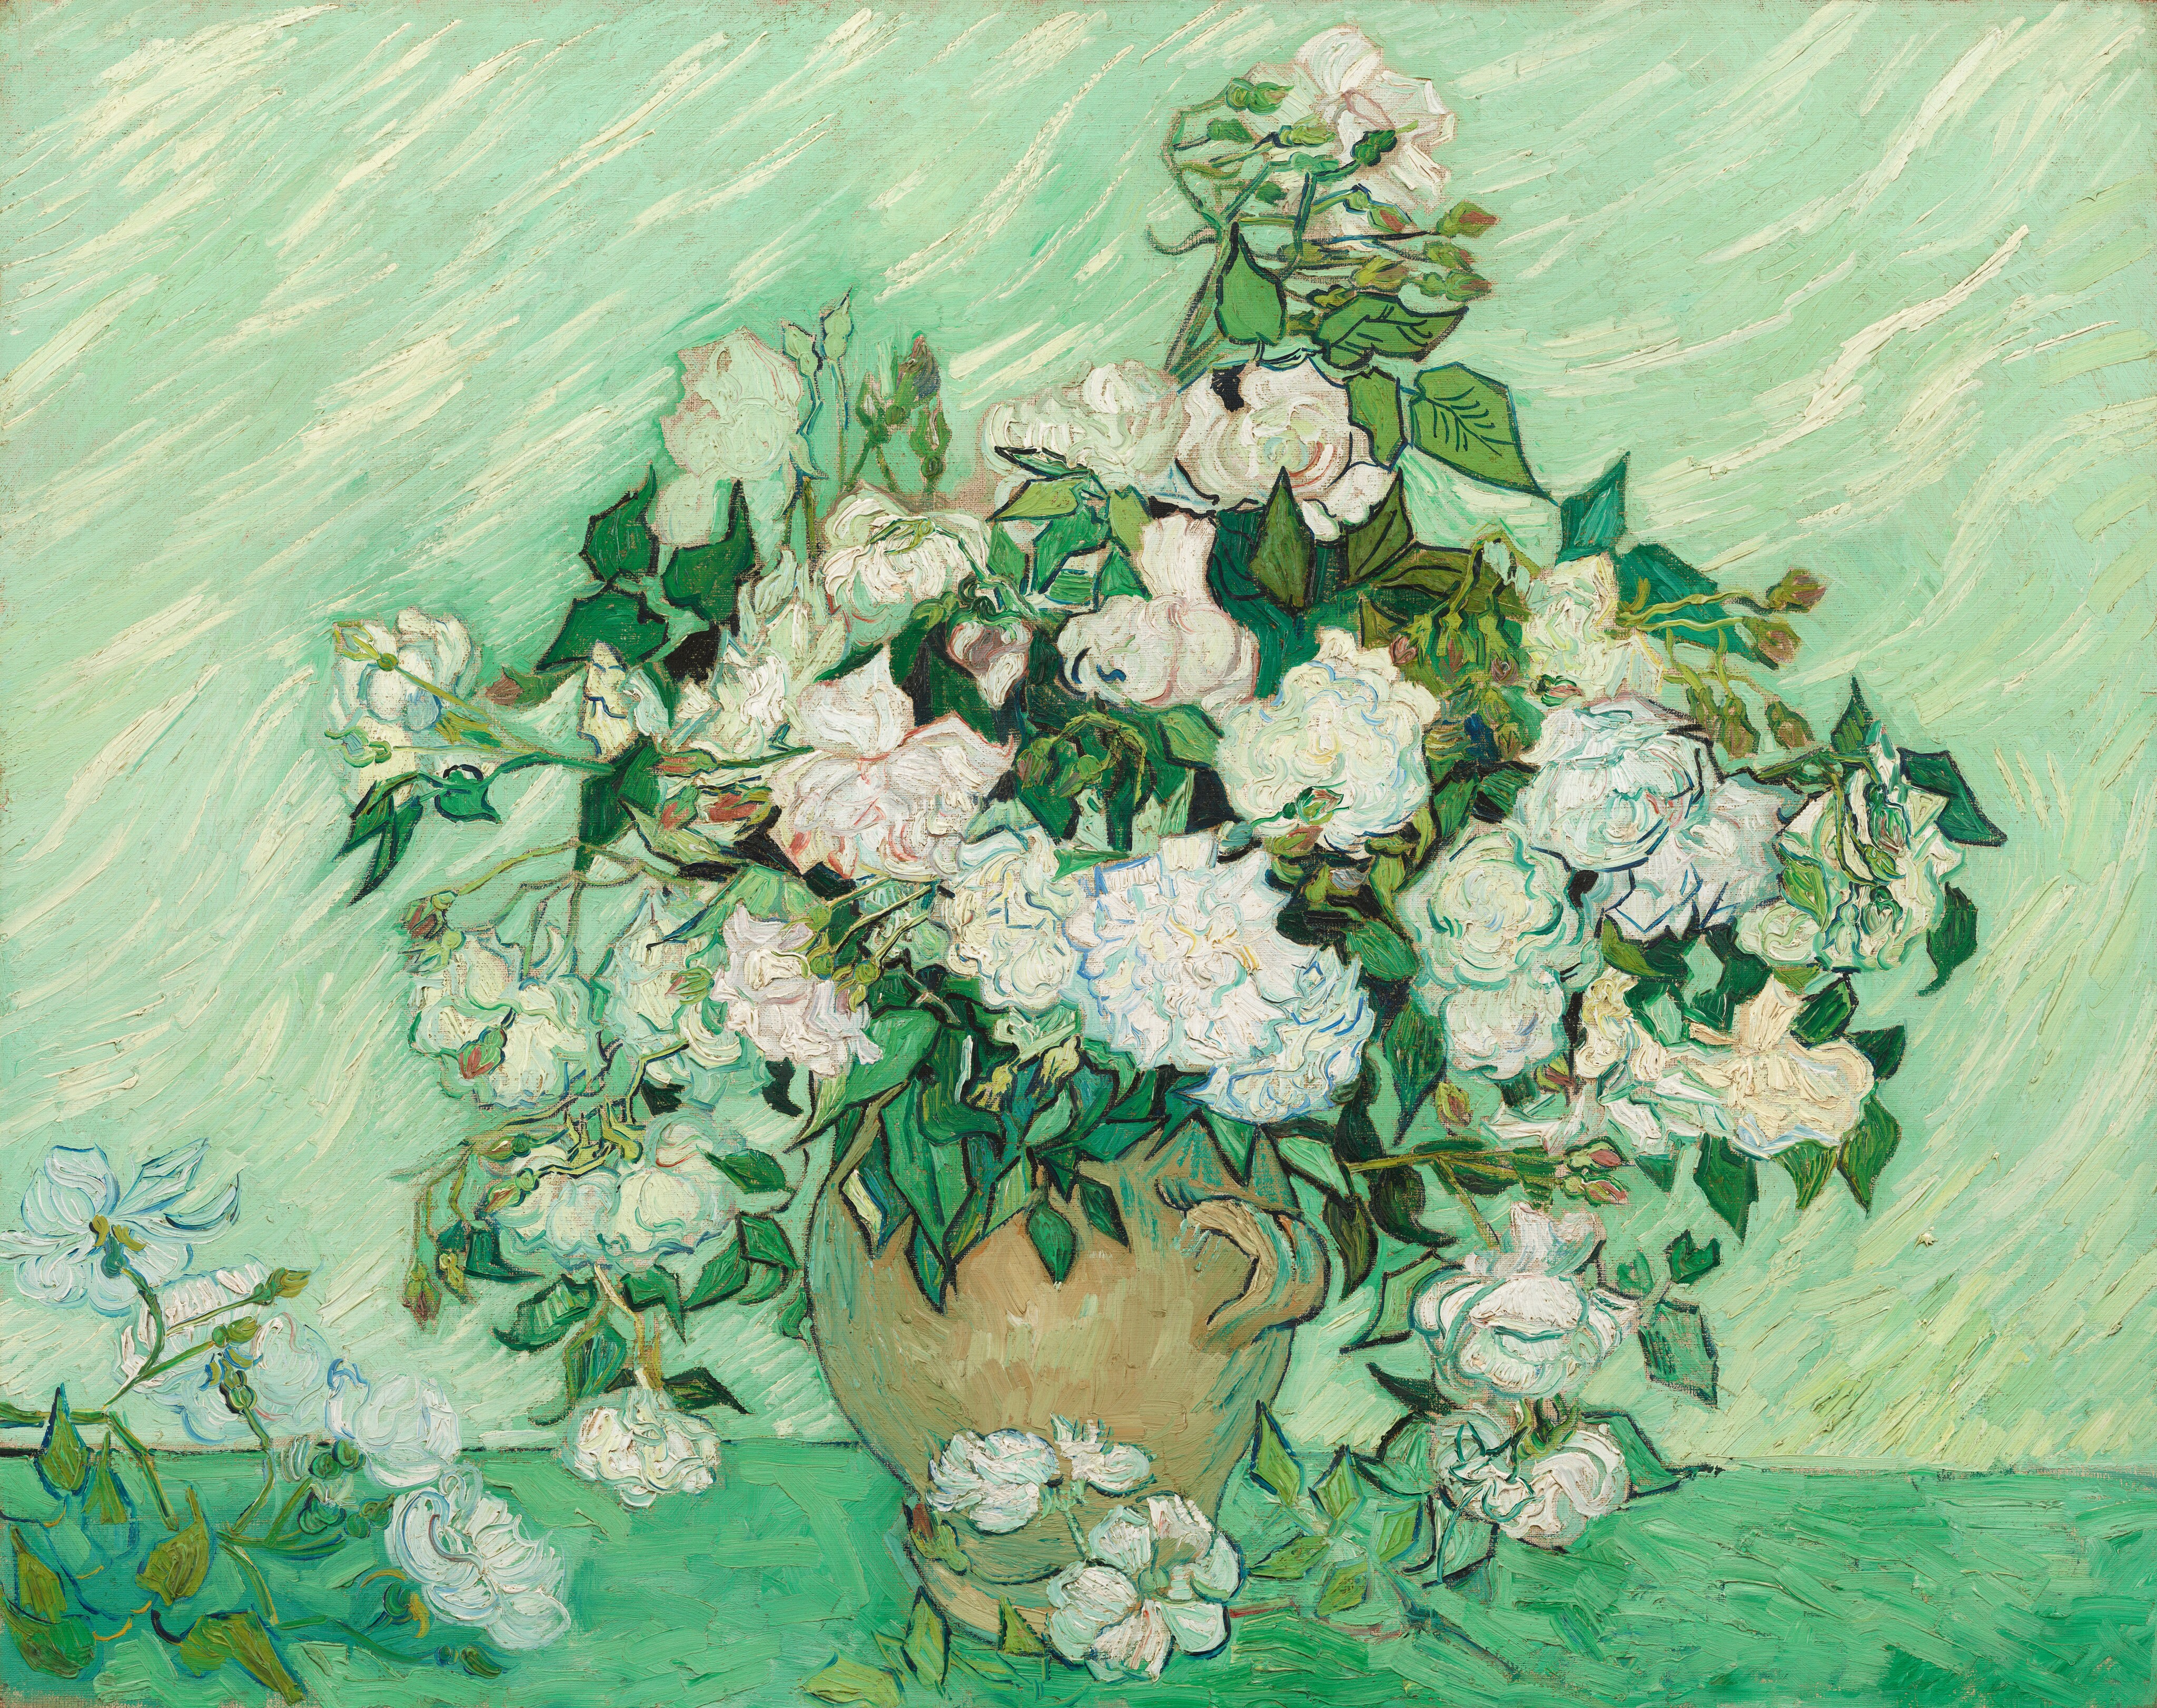 Roses by Vincent van Gogh - 1890 - 71 x 90 cm National Gallery of Art